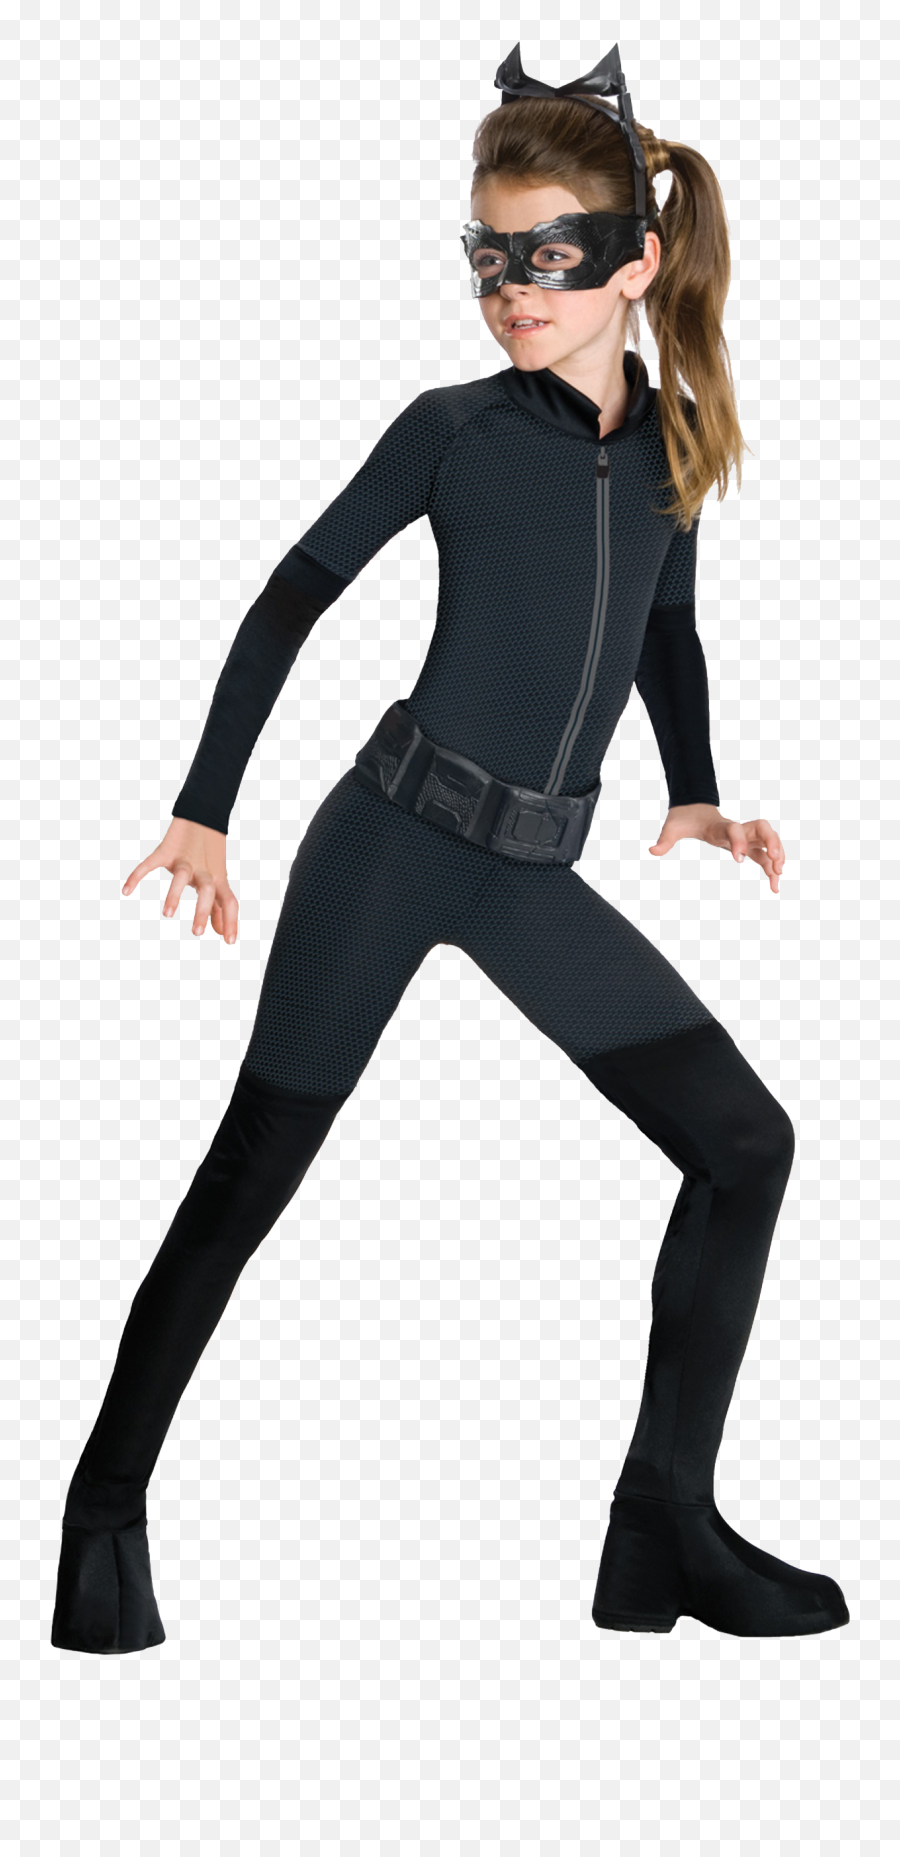 Catwoman Png Images Transparent Background